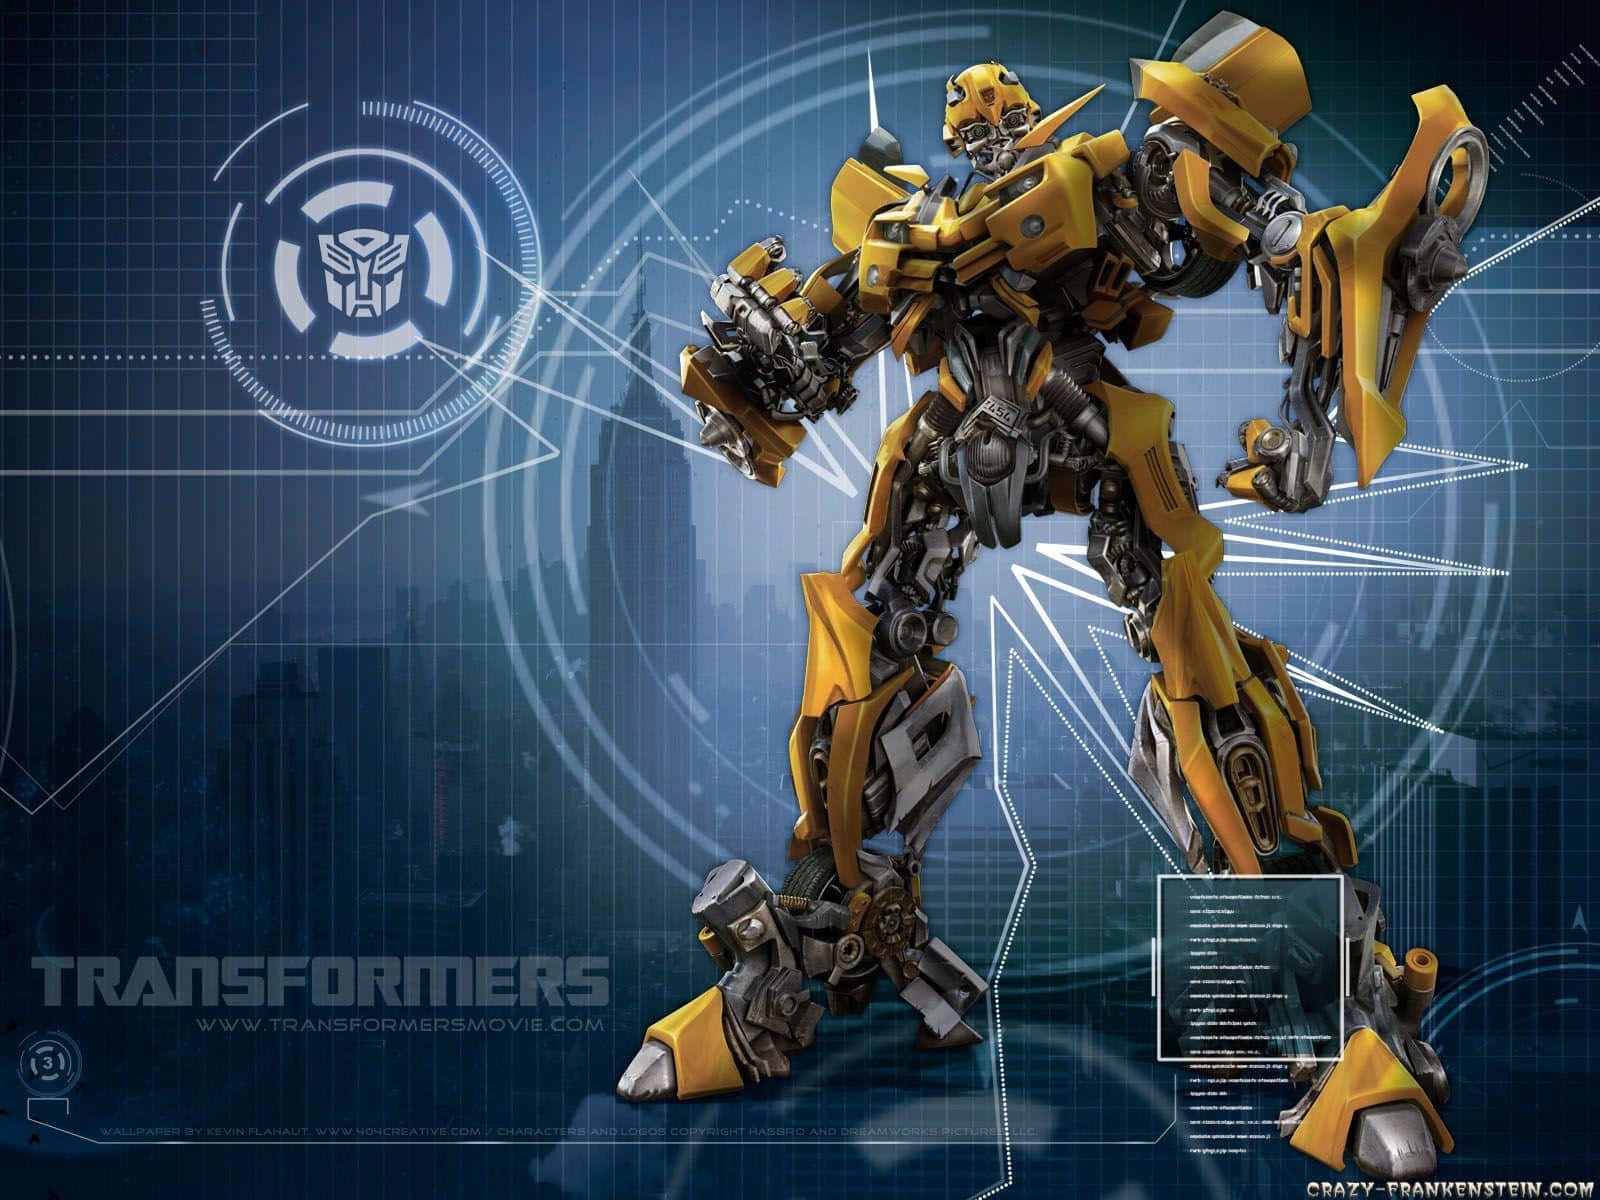 "Prepare for action - Bumblebee is ready to join the fight against evil!" Wallpaper